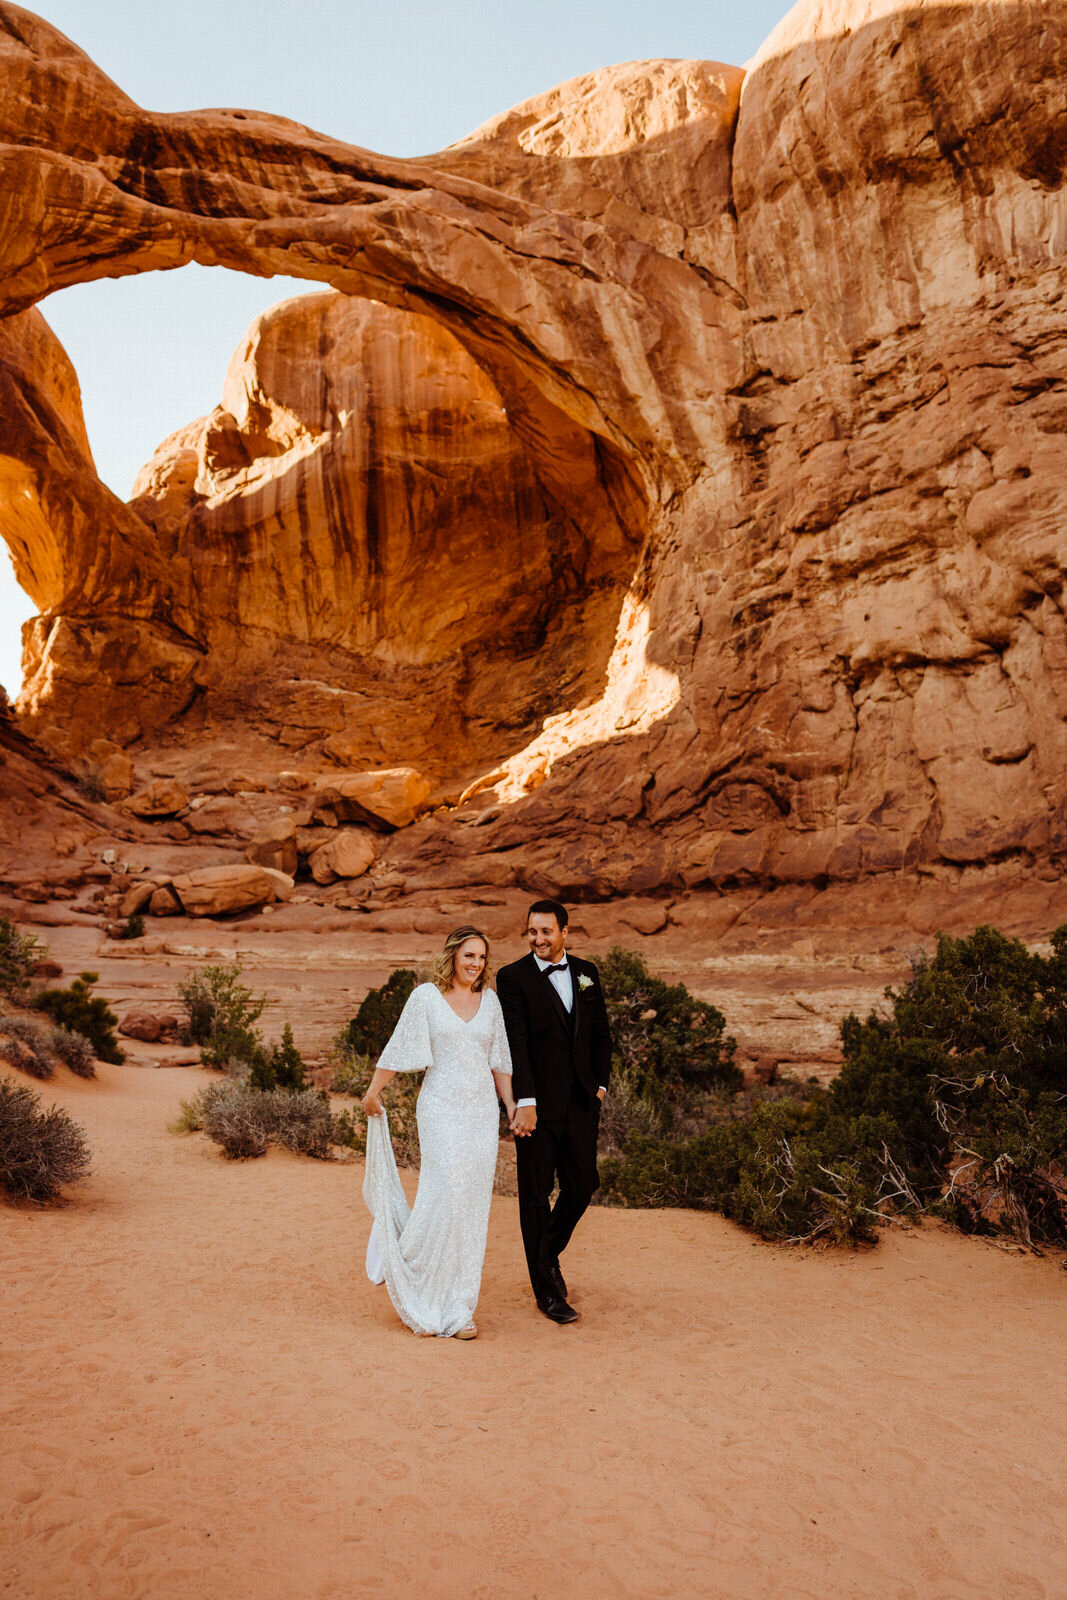 Arches-National-Park-Wedding-Glamorous-Bride-and-Groom-on-Trail (1).jpg